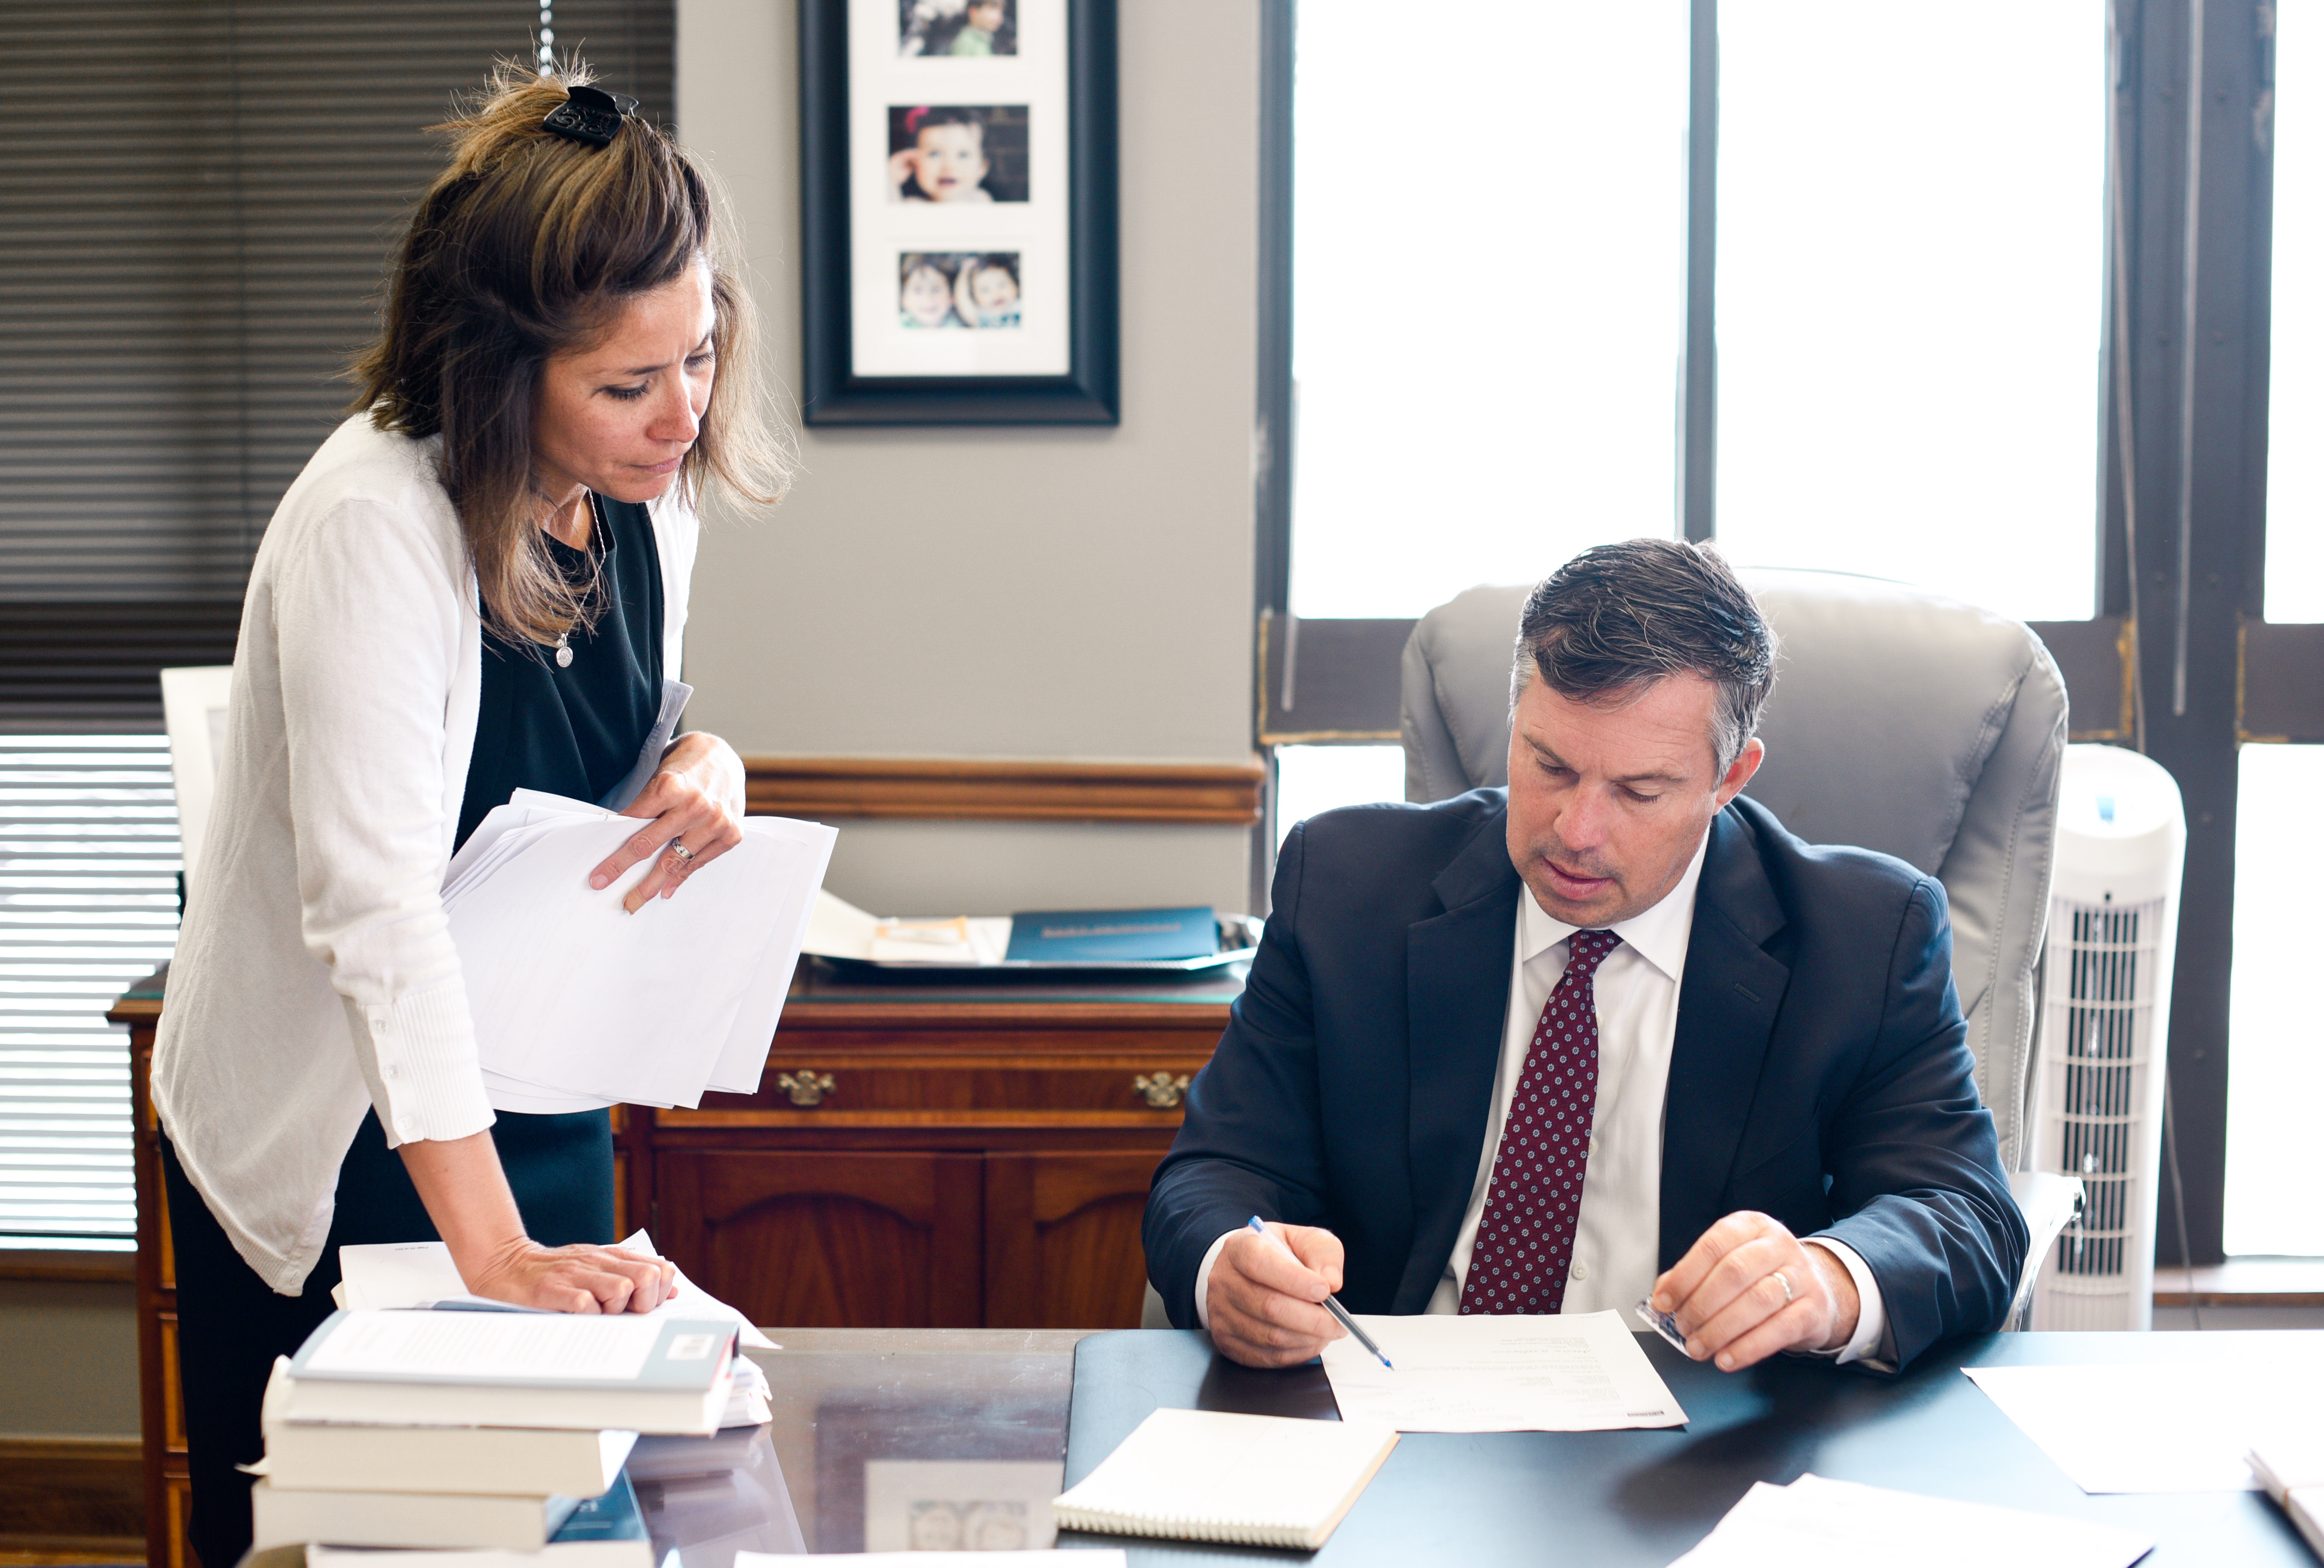 Why Should I Hire an Injury Lawyer Over an Average Attorney?